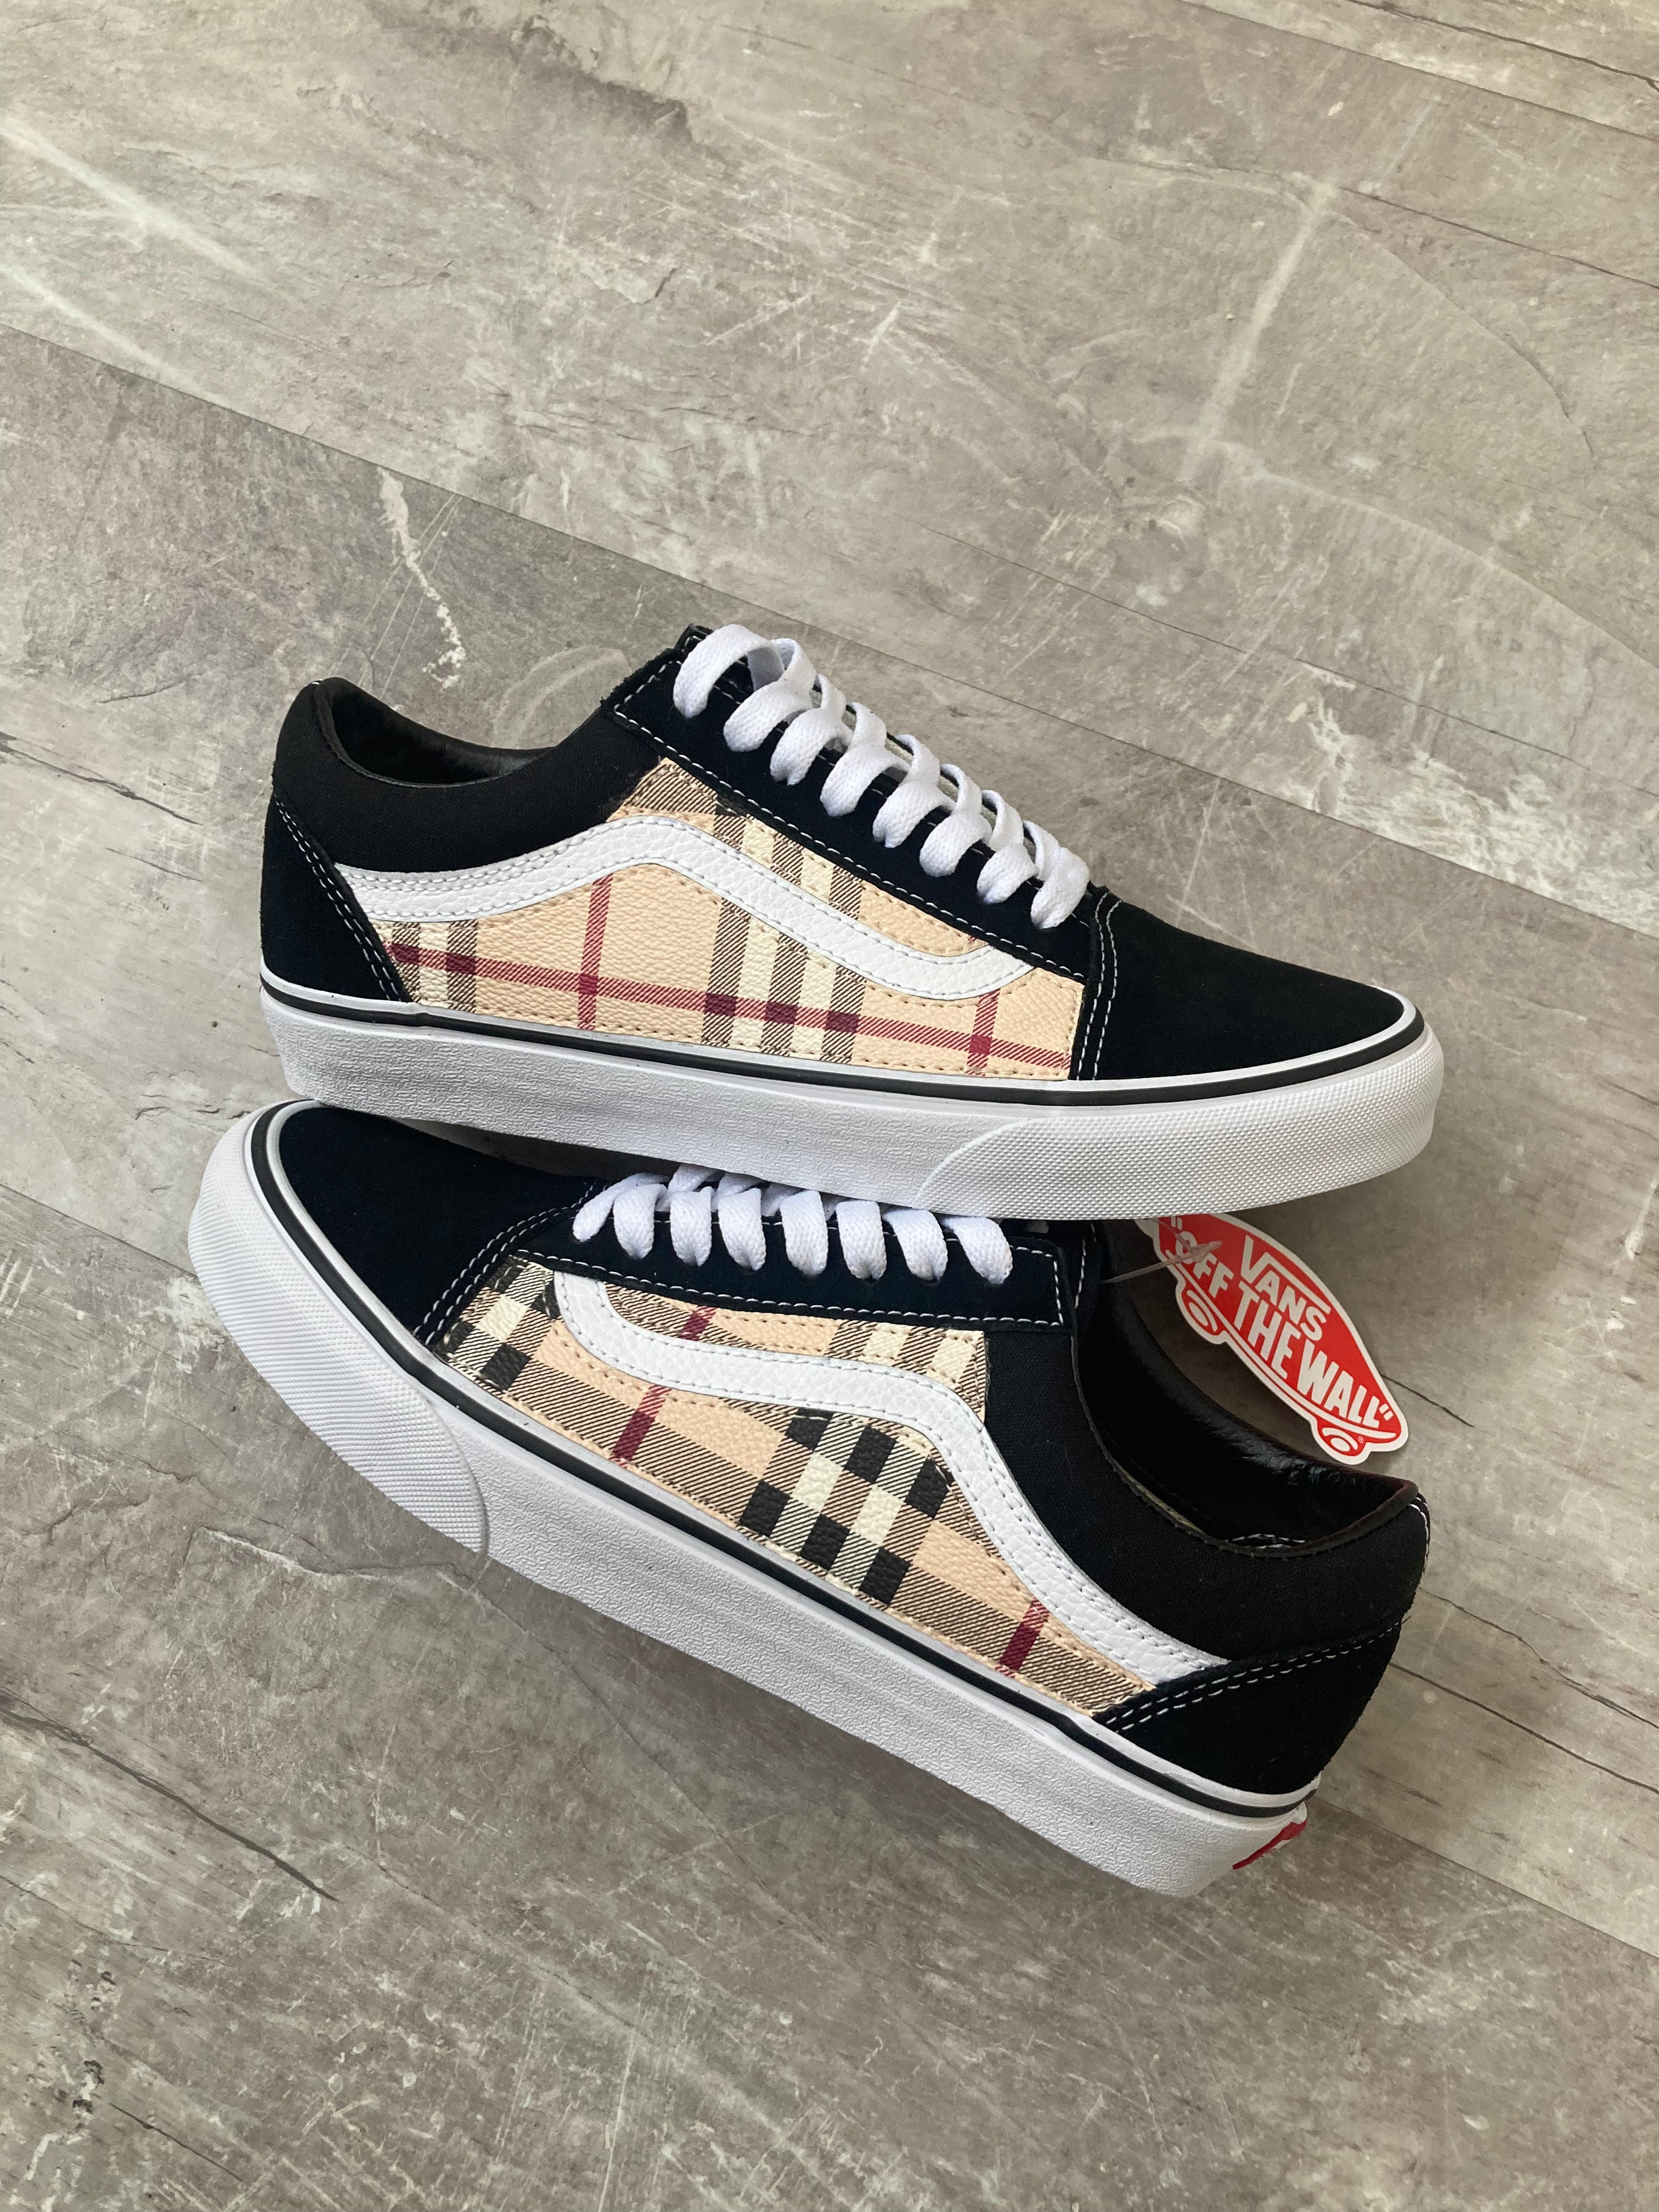 Street Style: Burberry Tennis Shoes Vans Collection